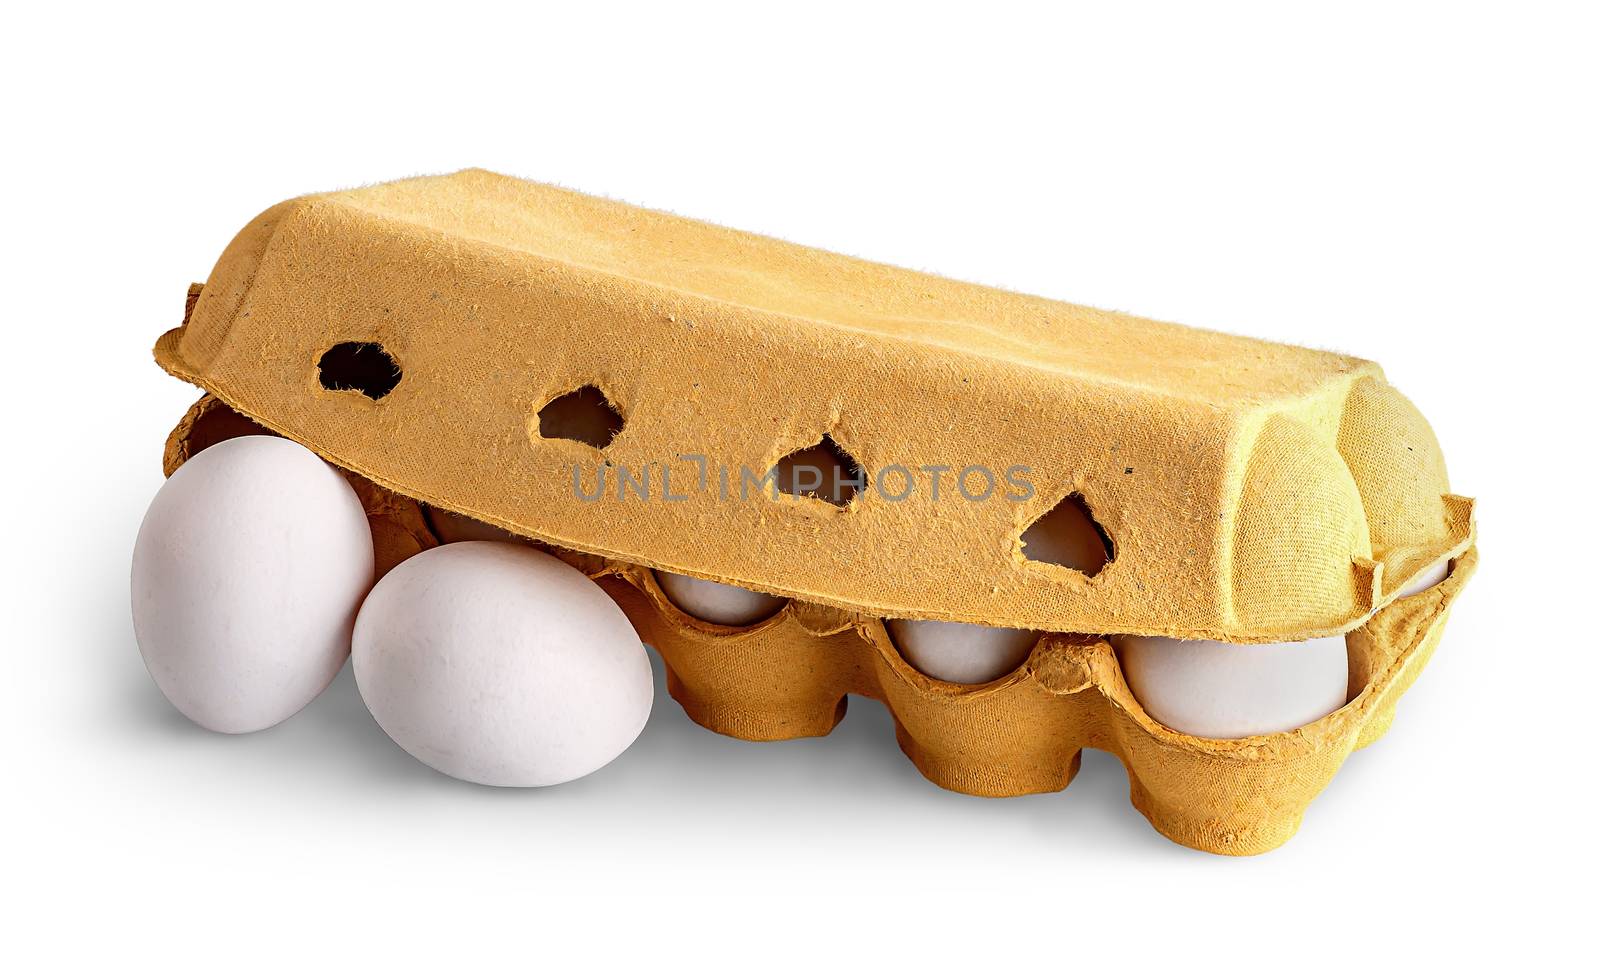 Closed egg tray and two eggs in front by Cipariss